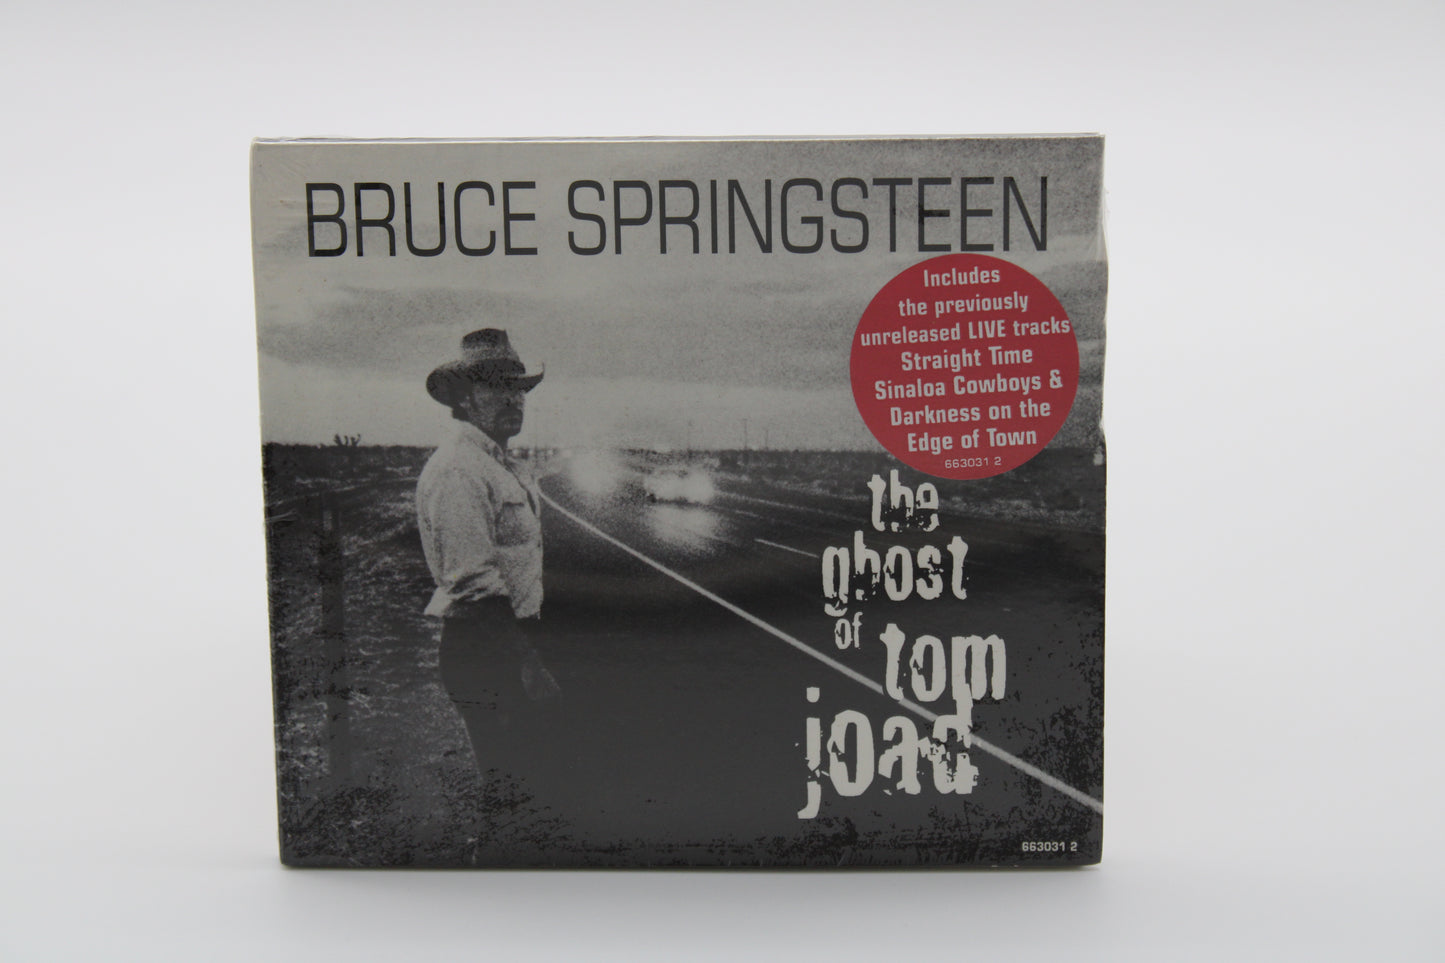 Bruce Springsteen CD/Digipak - Sealed - The Ghost of Tom Joad with Live Tracks